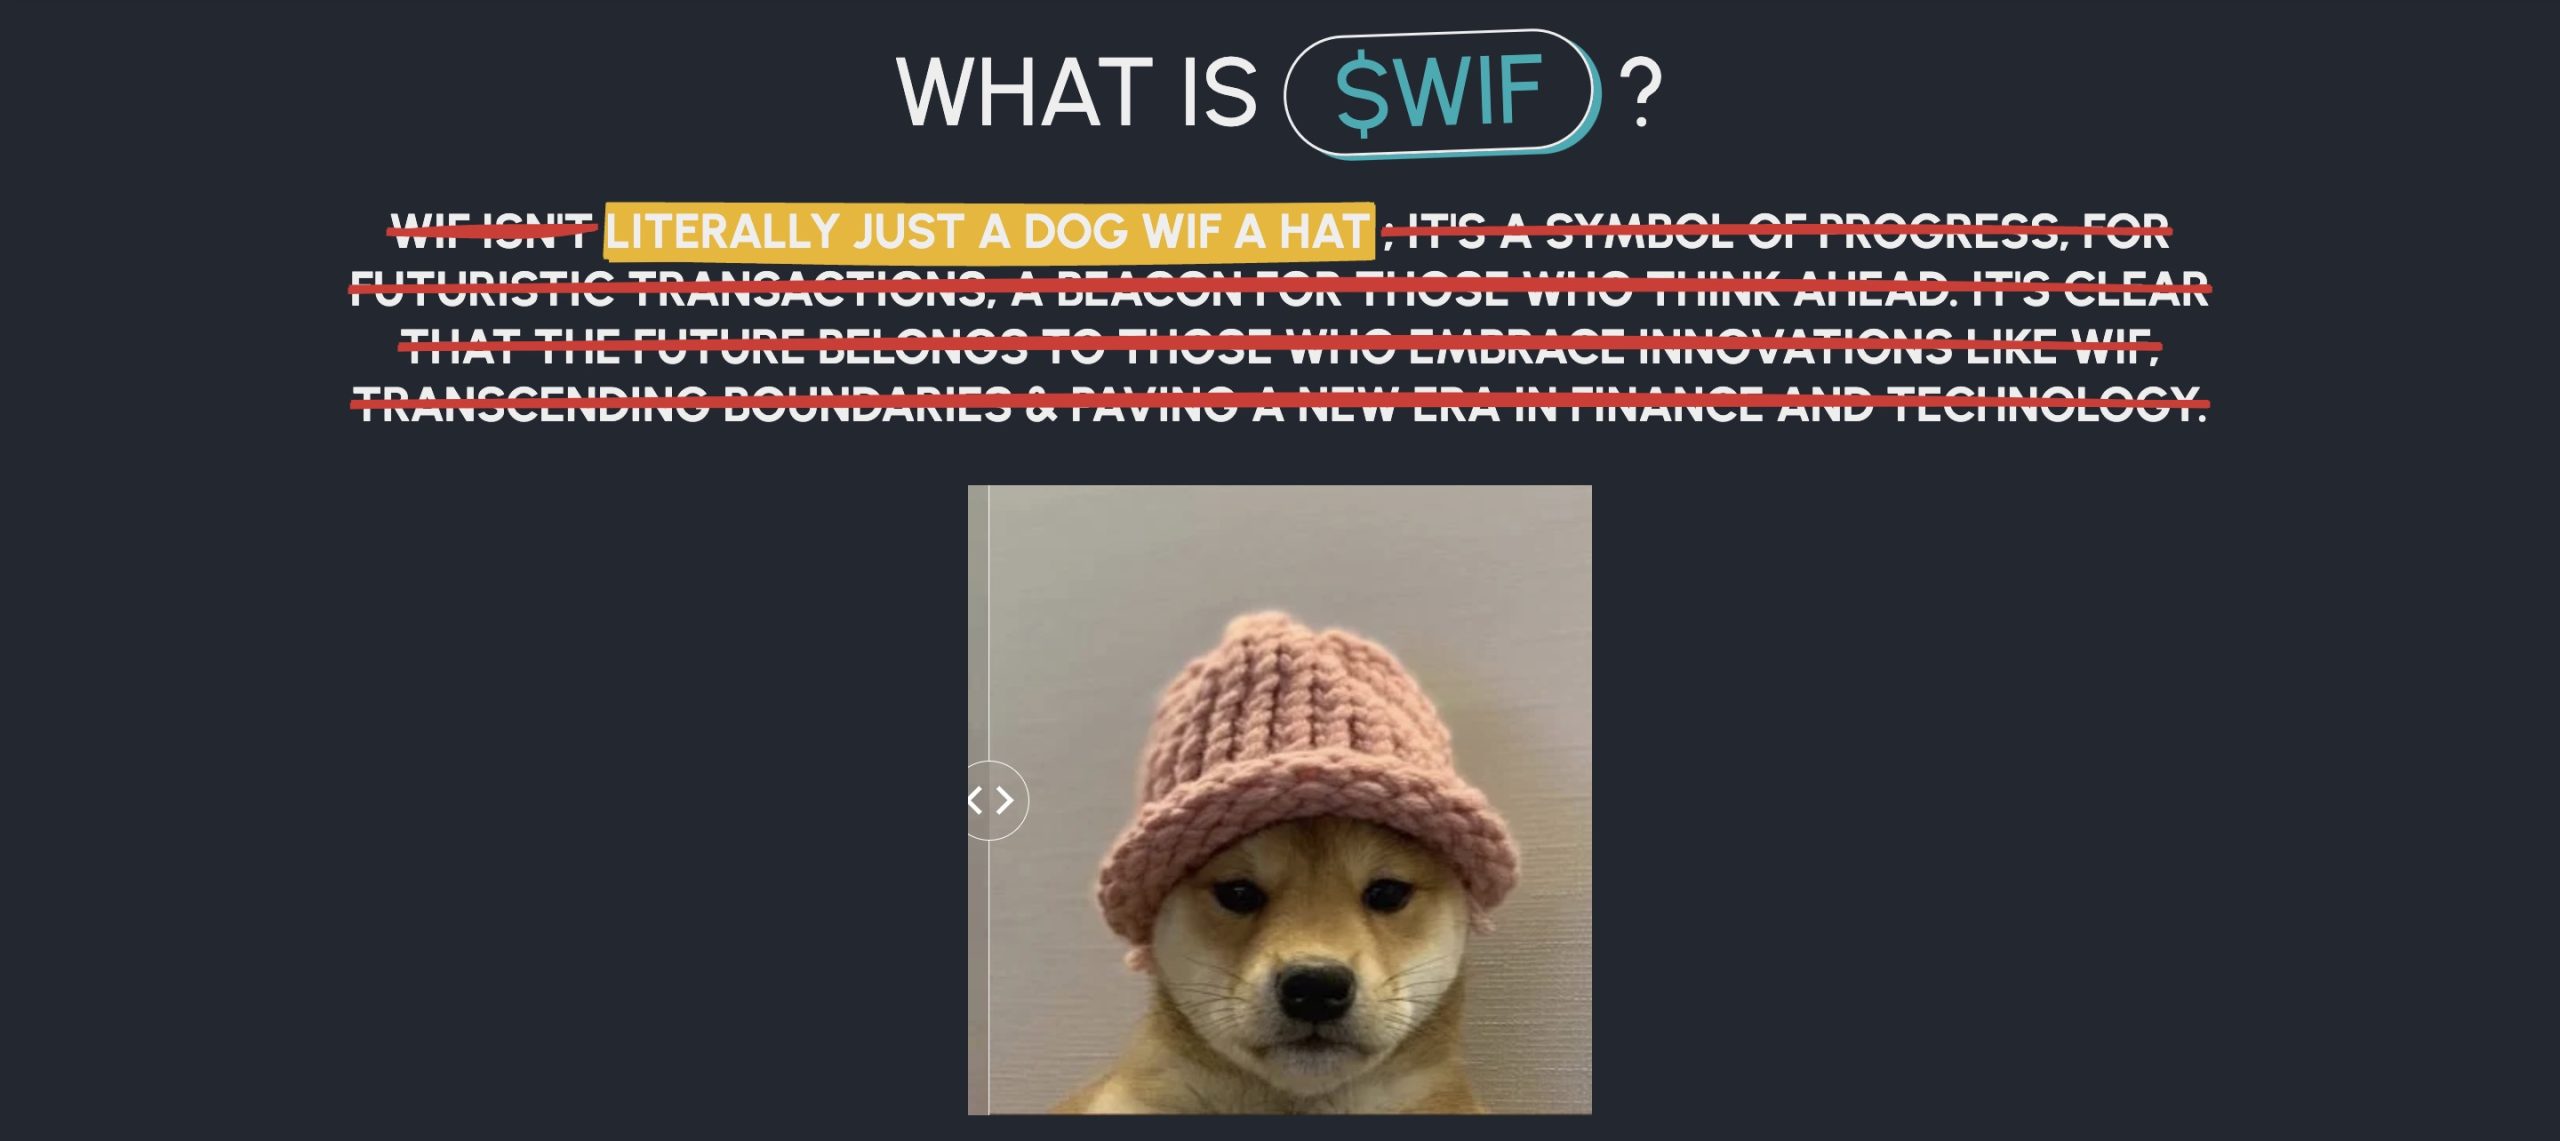 Is it too late to buy Dogwifhat?